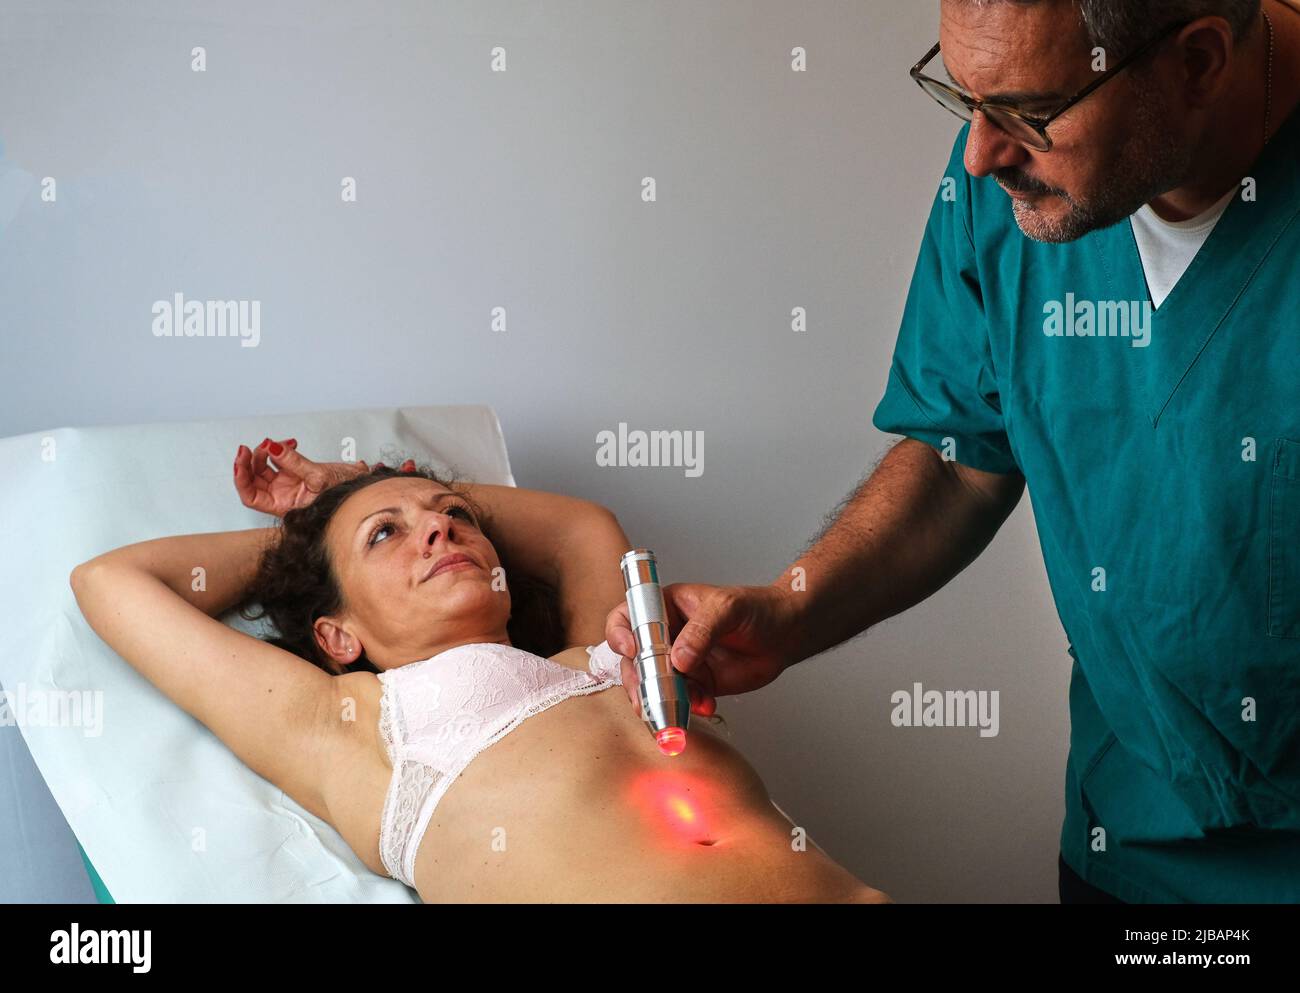 skin stimulation with electromagnetic frequencies Stock Photo